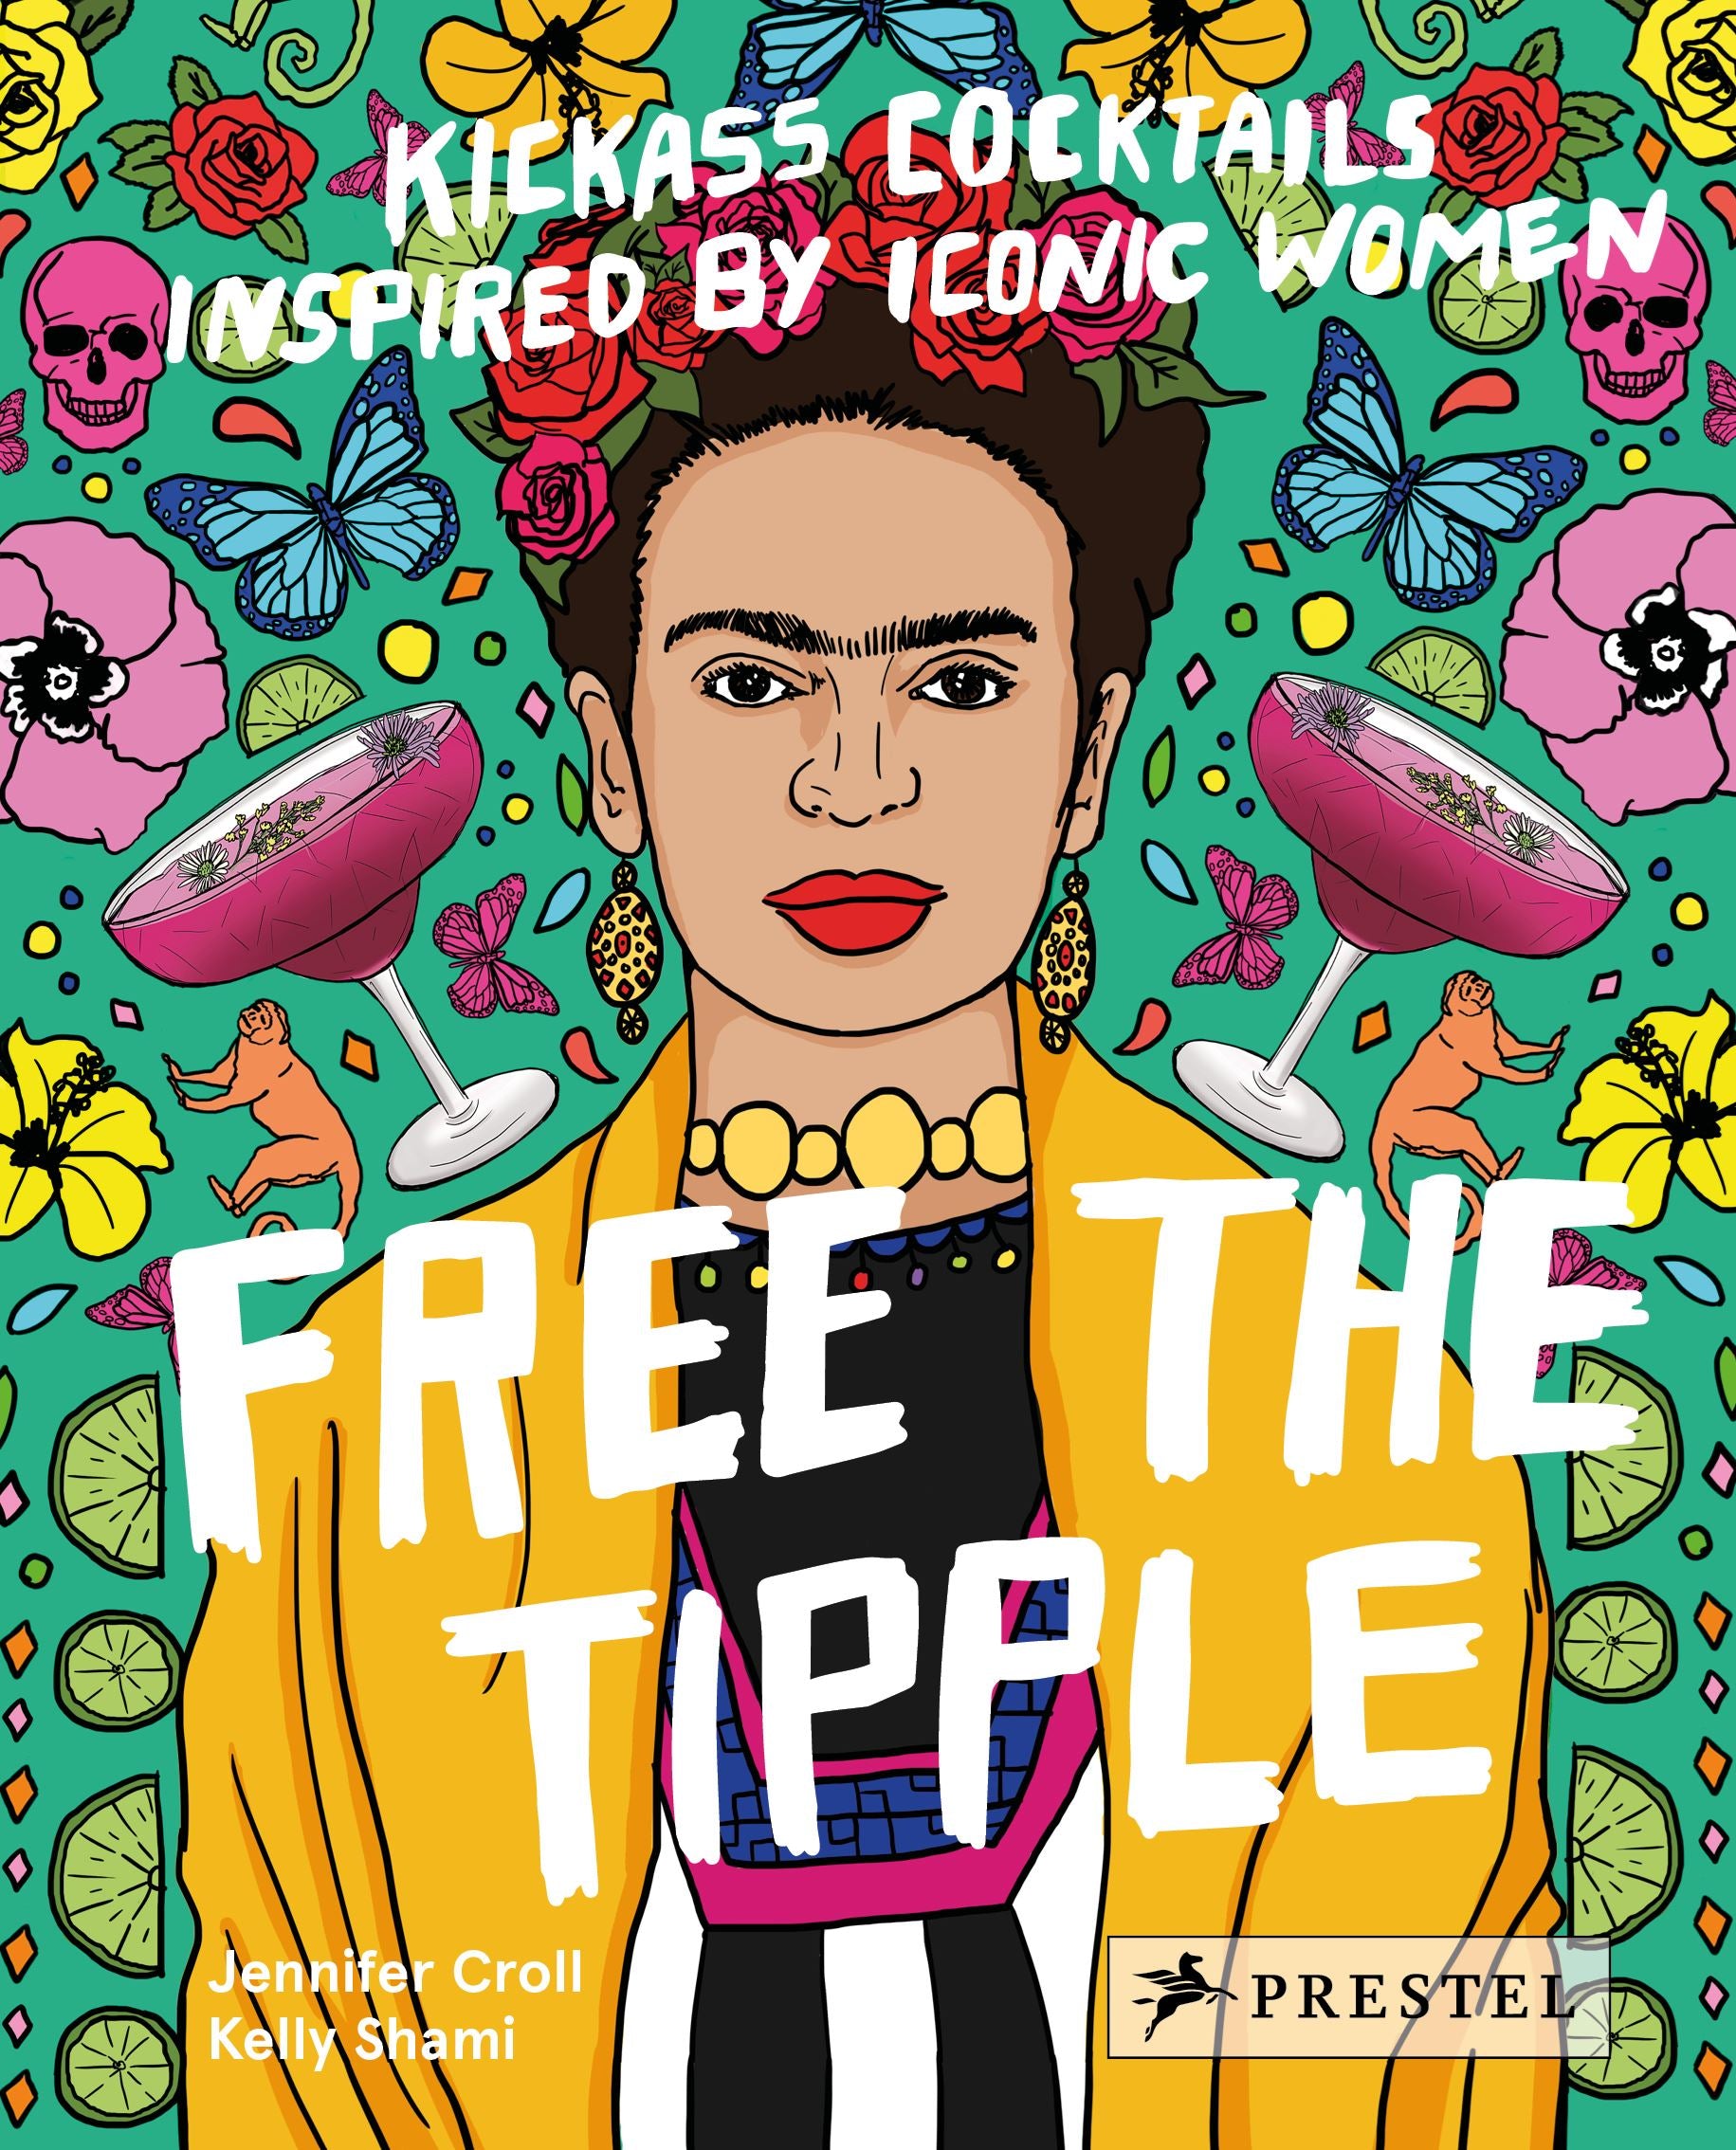 Free the Tipple (Kickass Cocktails Inspired by Iconic Women)